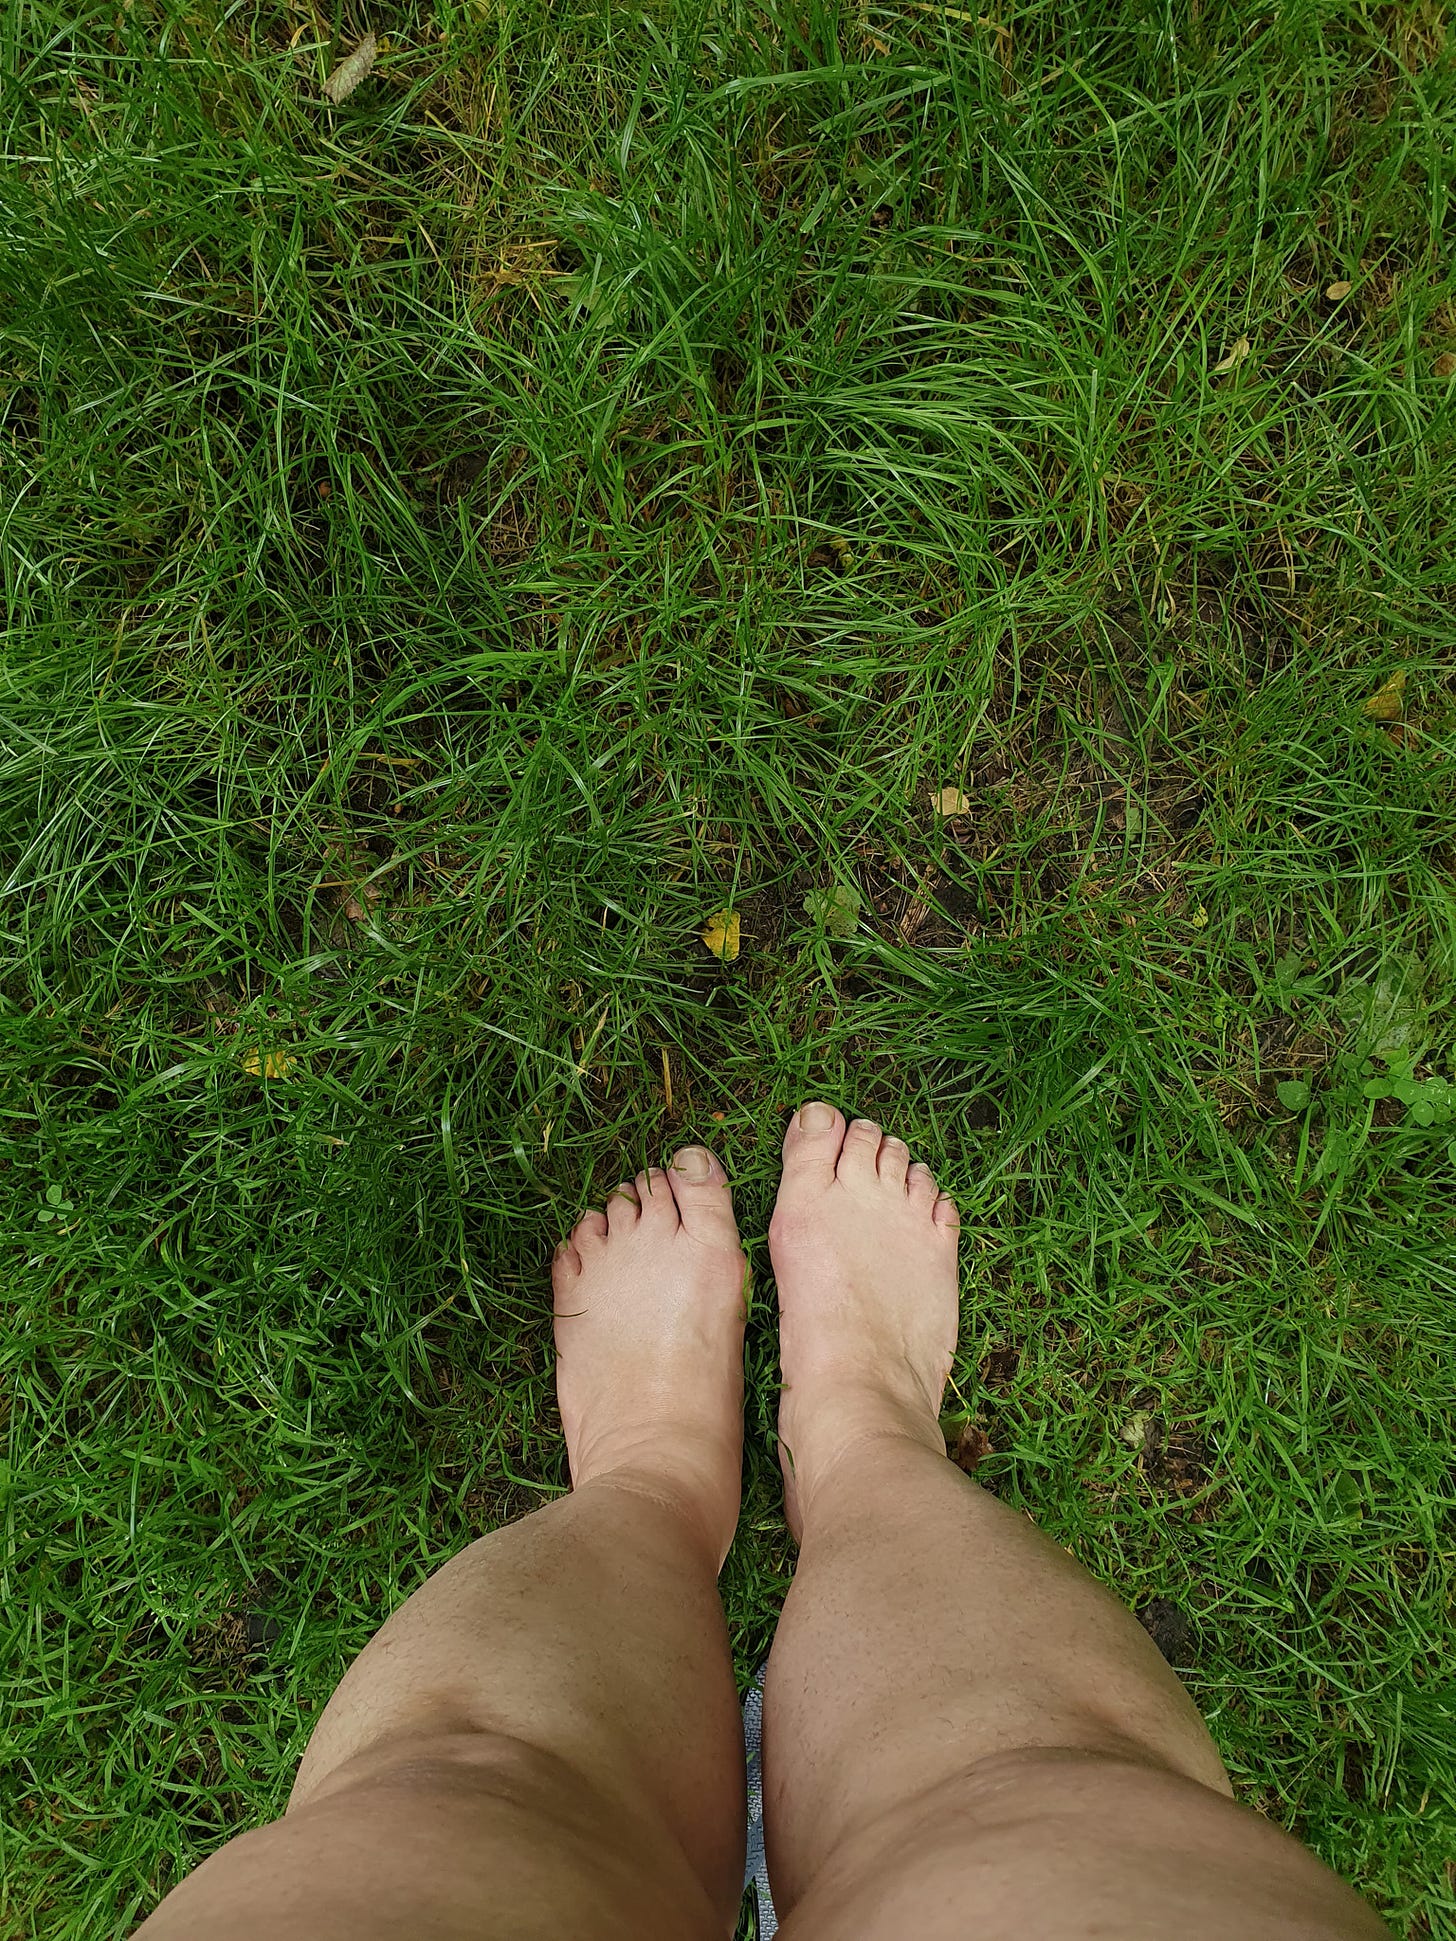 Photo of a woman's legs and feet, she is standing on grass with no shoes on.